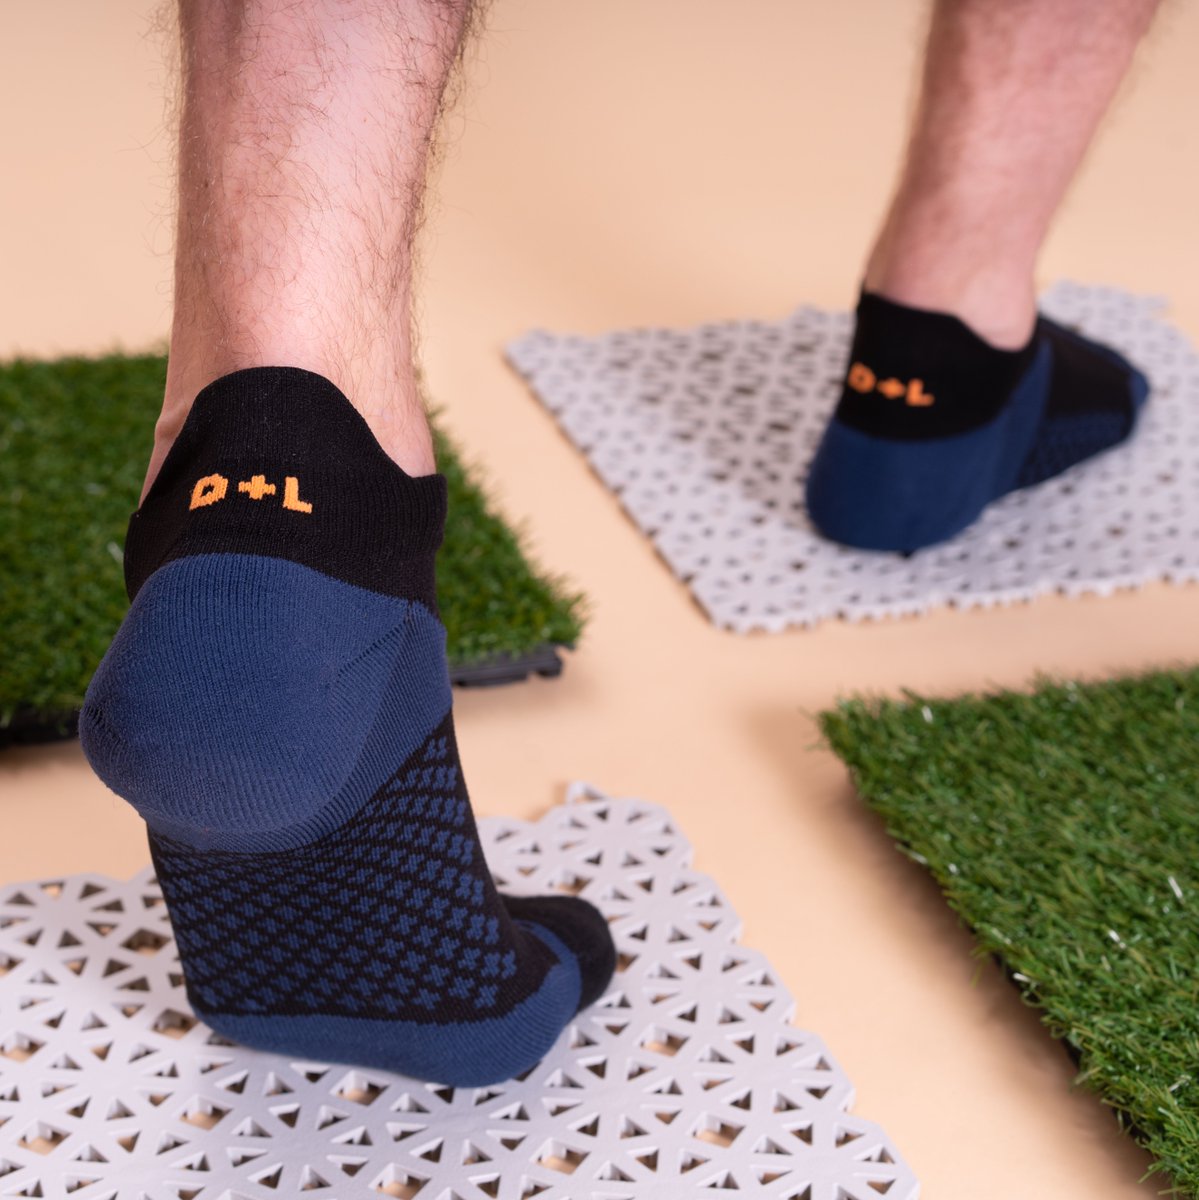 Just say no to socks that slip down your feet with every step you take. Shop our step-up tab socks and you'll never have that problem ever again: bit.ly/3BuEH0v